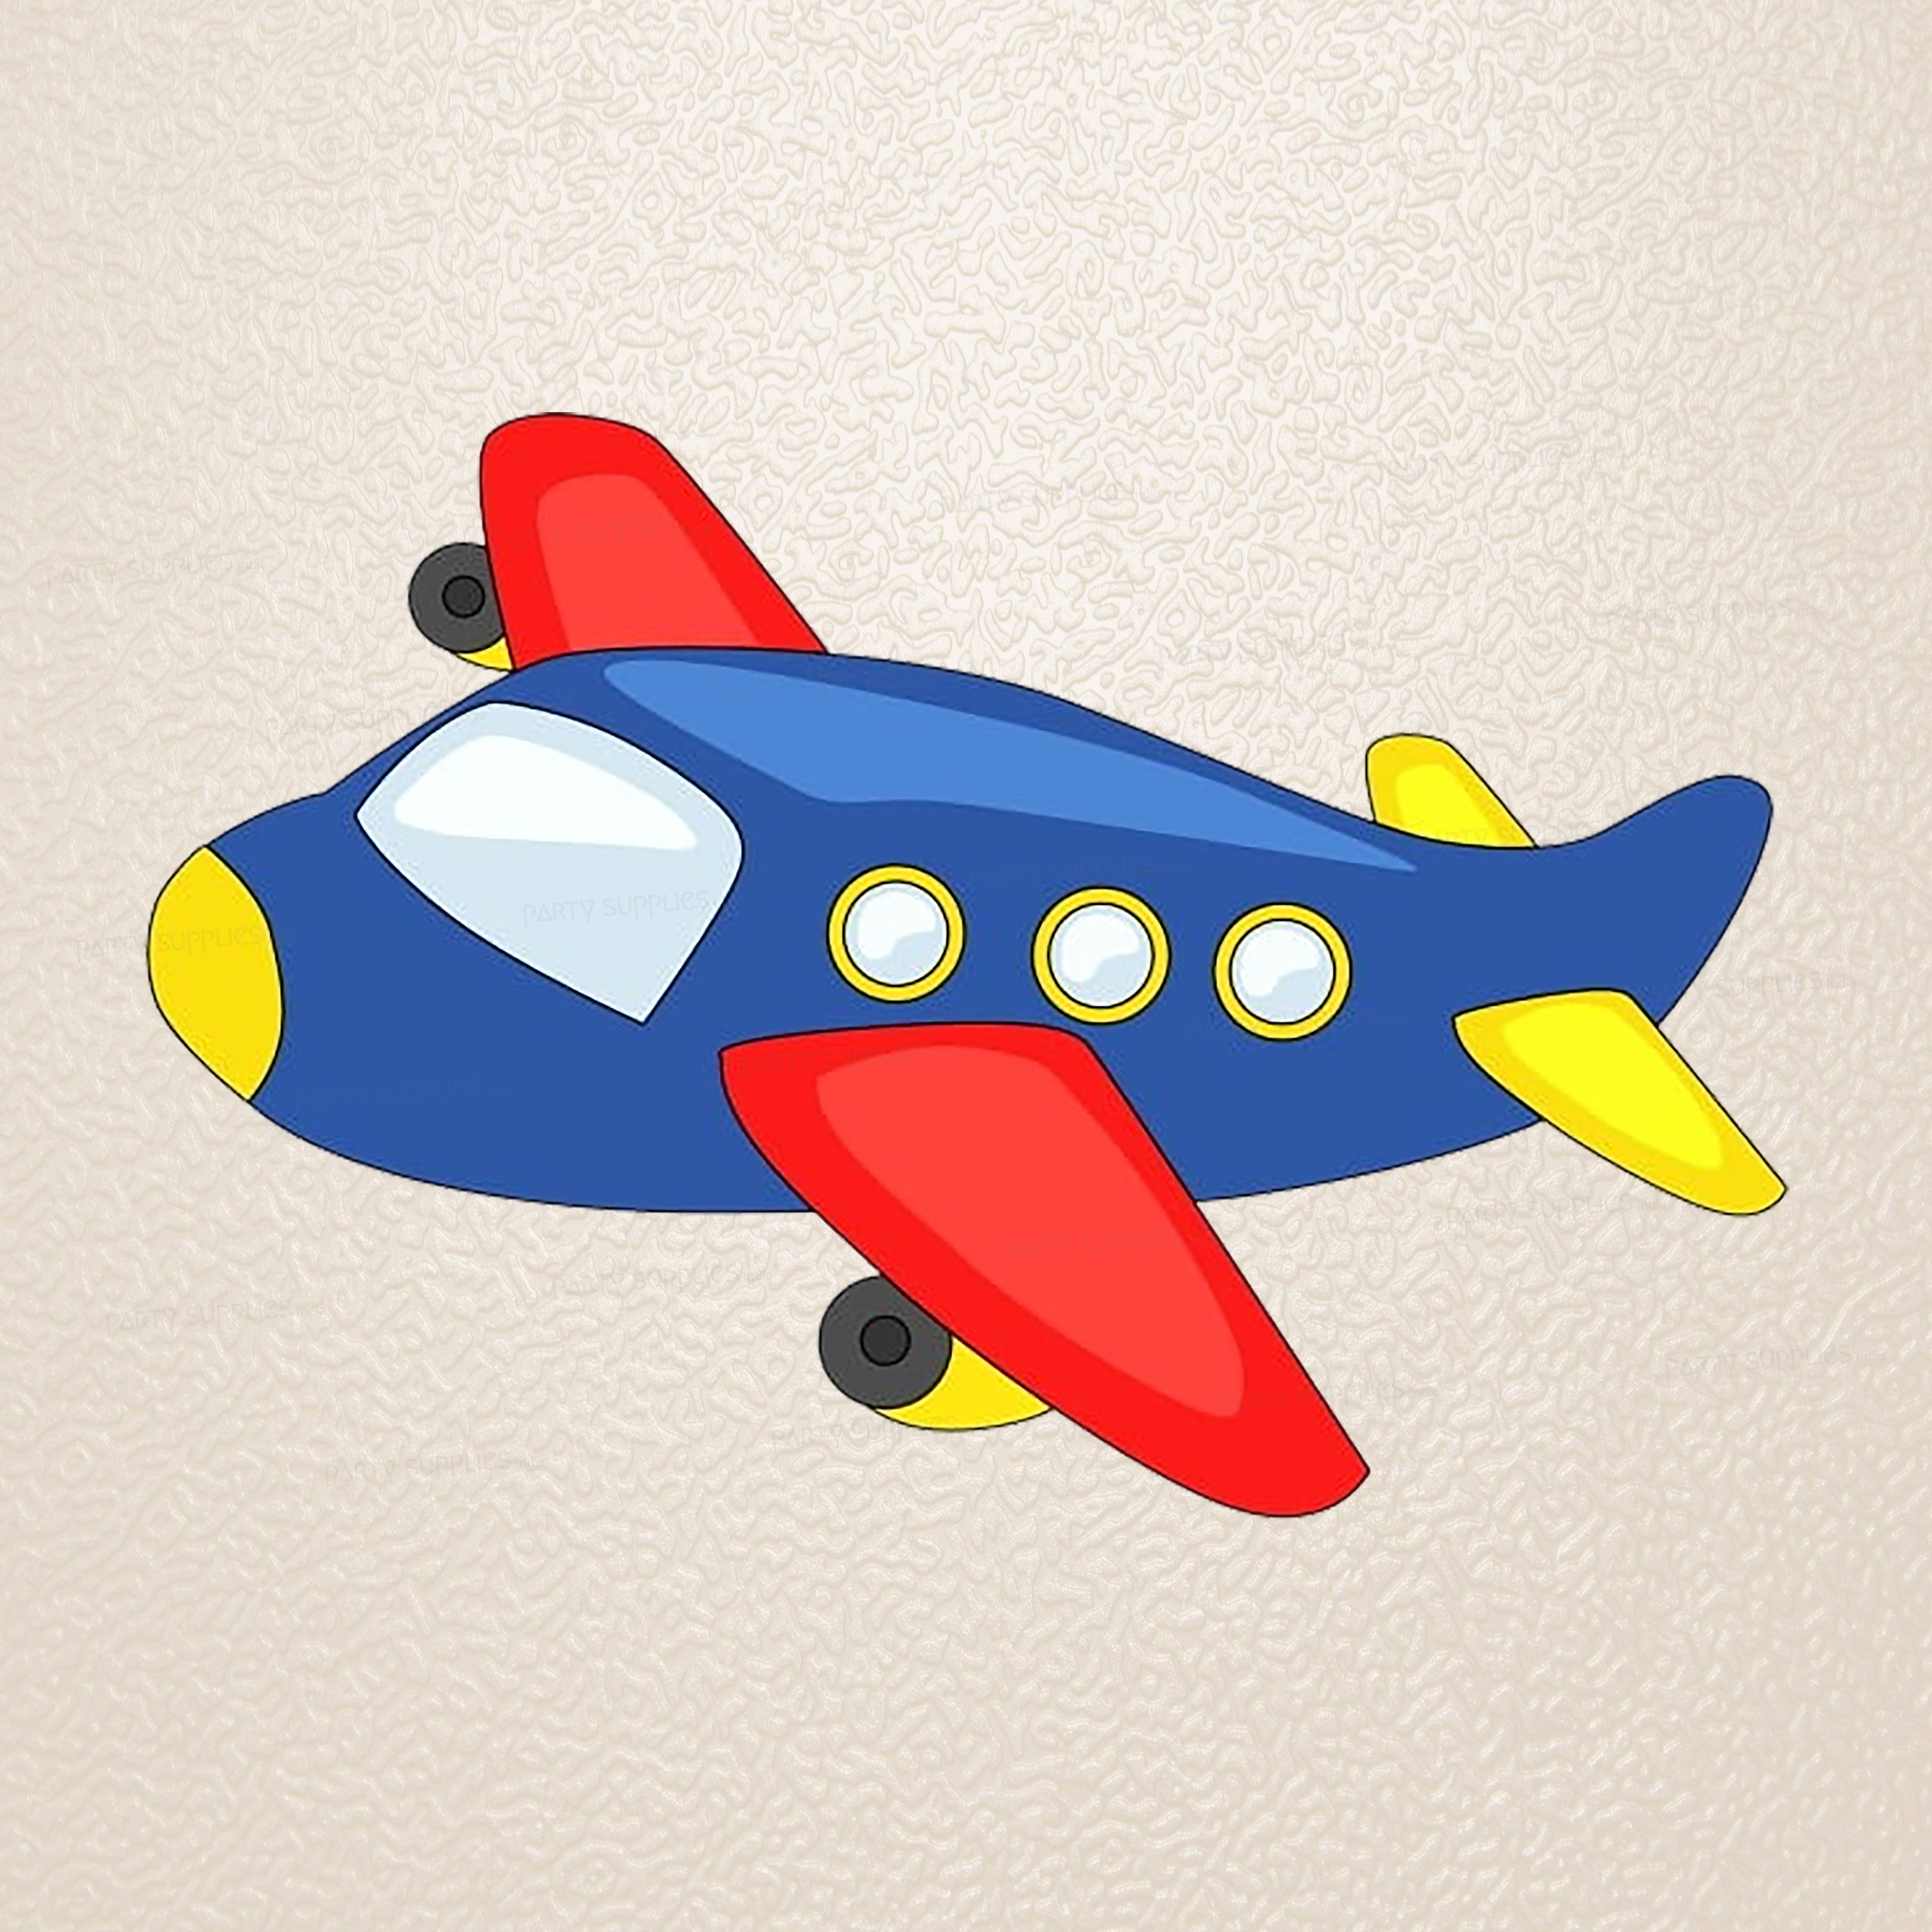 aeroplane drawing images aeroplane drawing - ClipArt Best - ClipArt Best